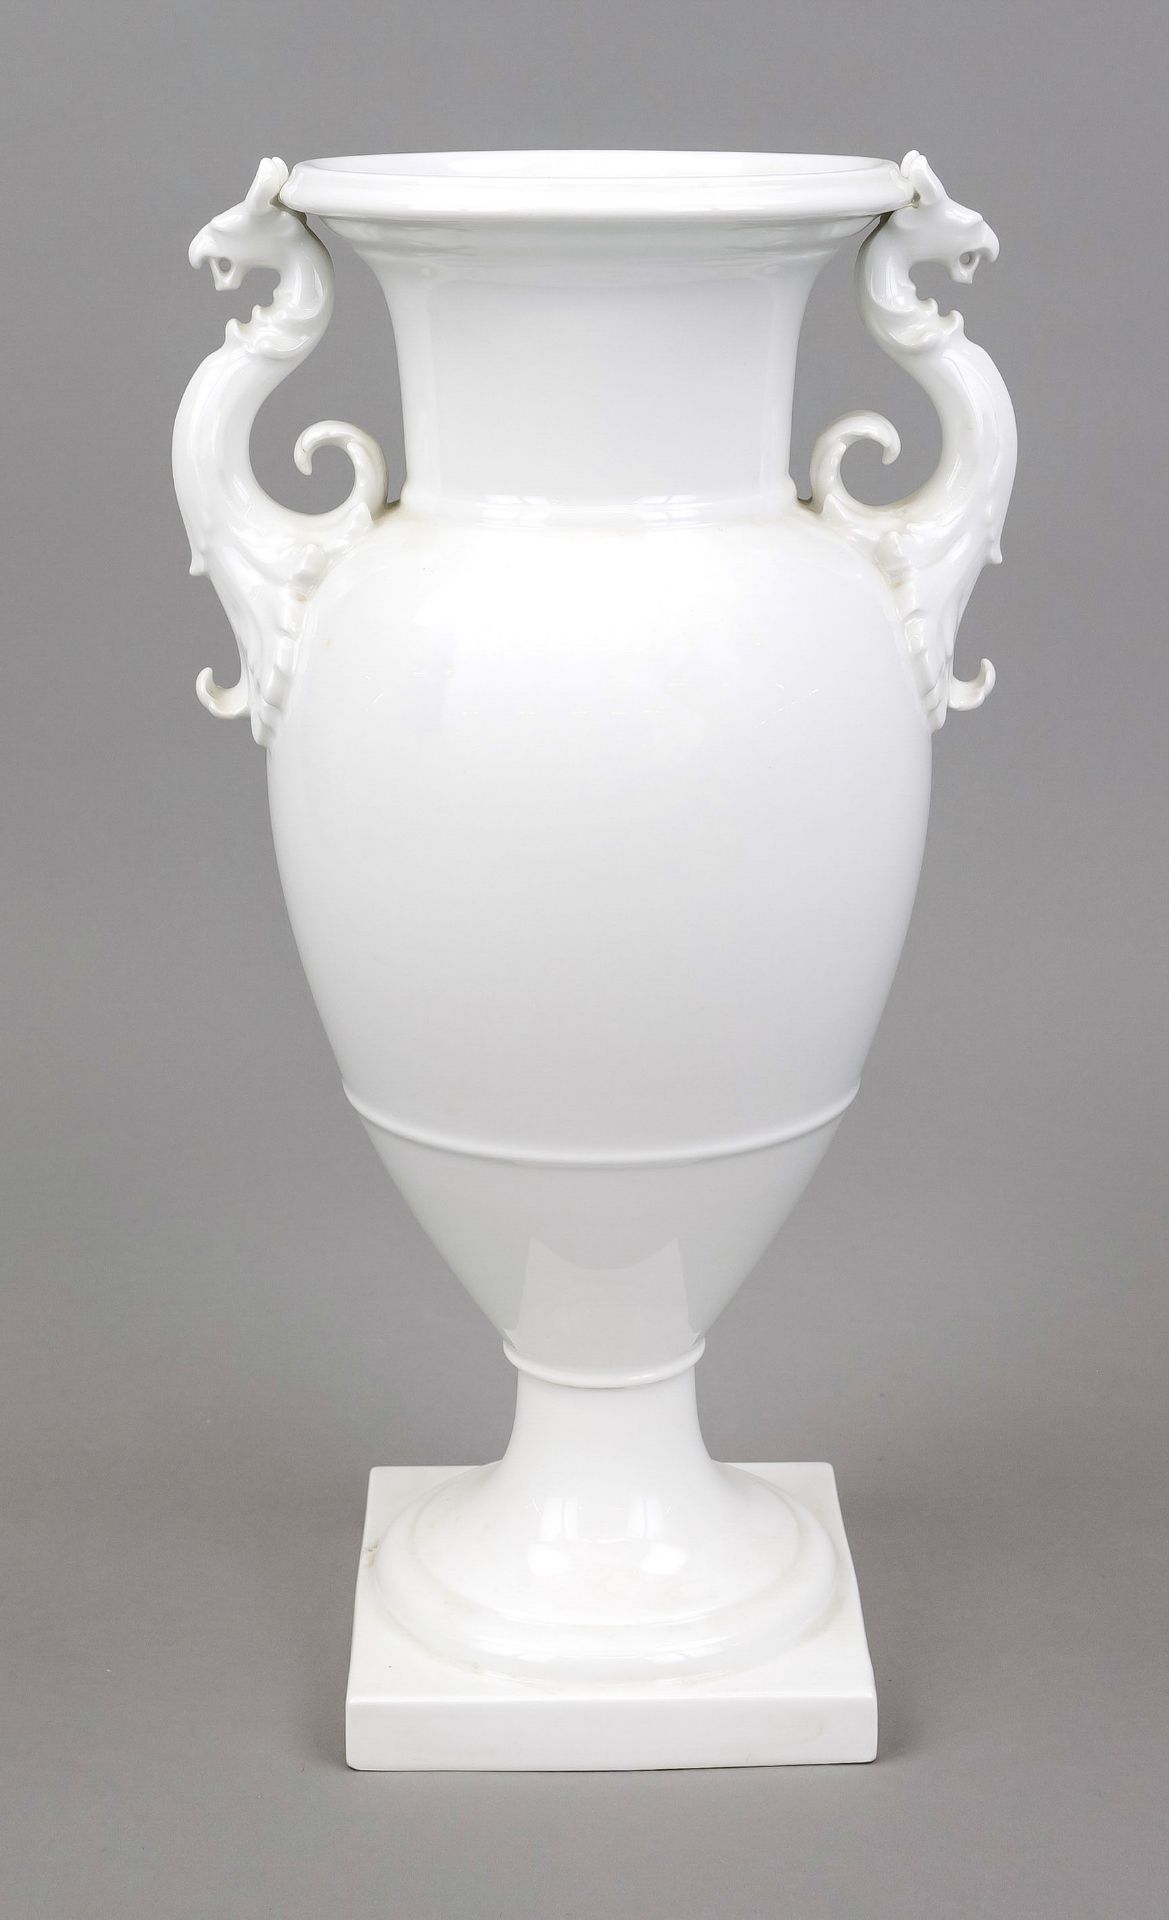 French vase with griffin handles, KPM Berlin, mark 1962-92, 2nd choice, white, designed by Karl